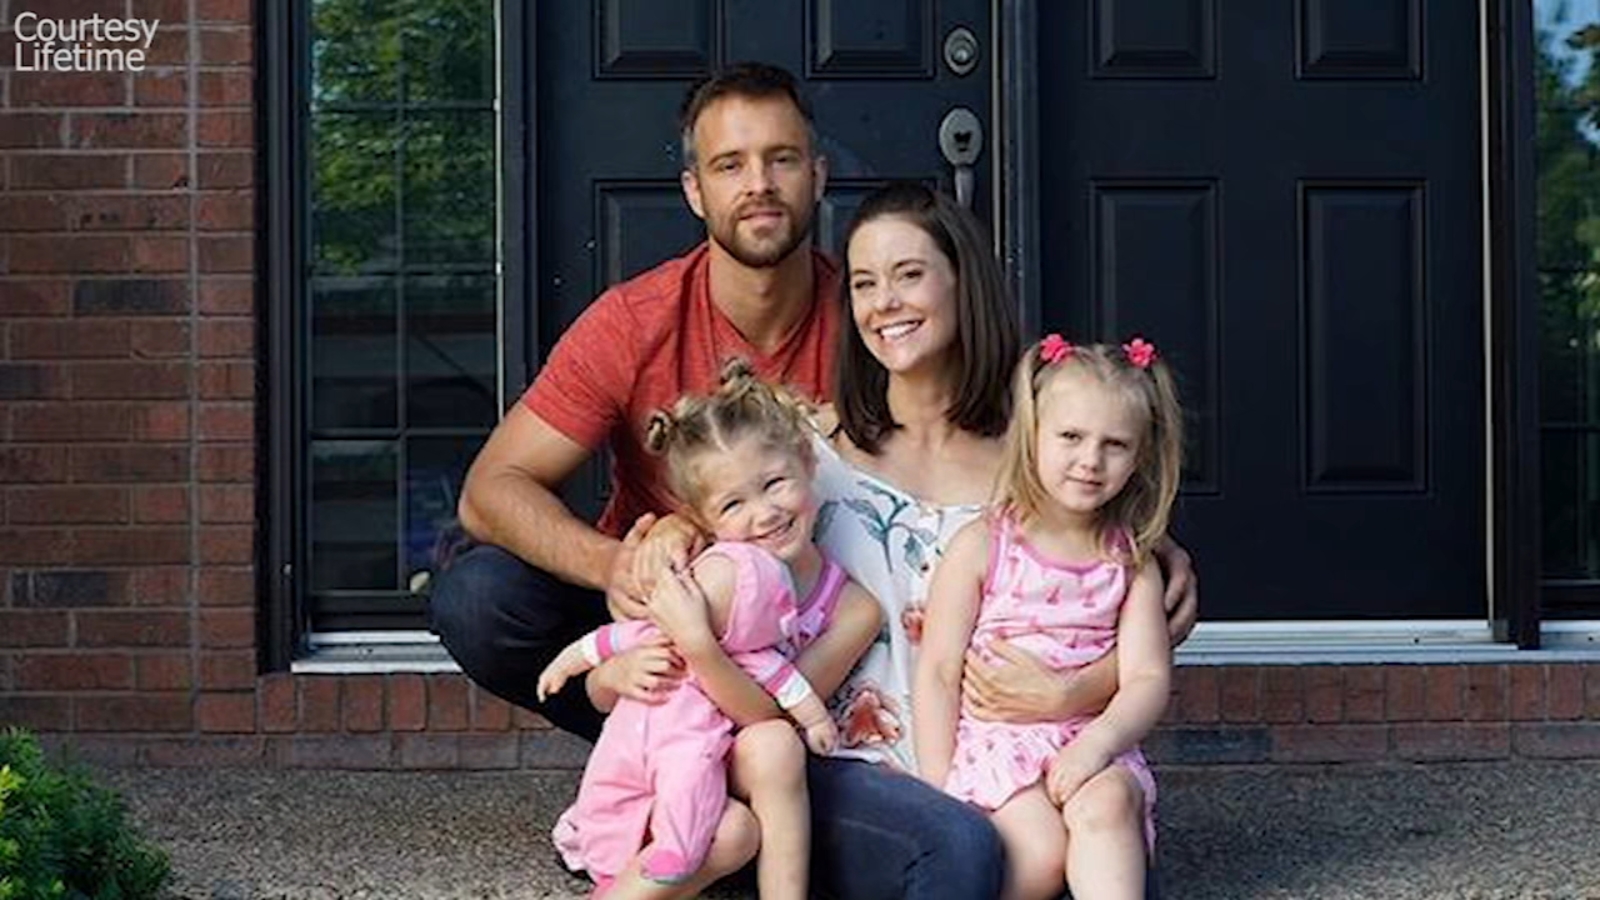 Where is Chris Watts Now? Is He Out of Wisconsin’s Prison? Find Out About The Man Who Killed His Family For His Mistress